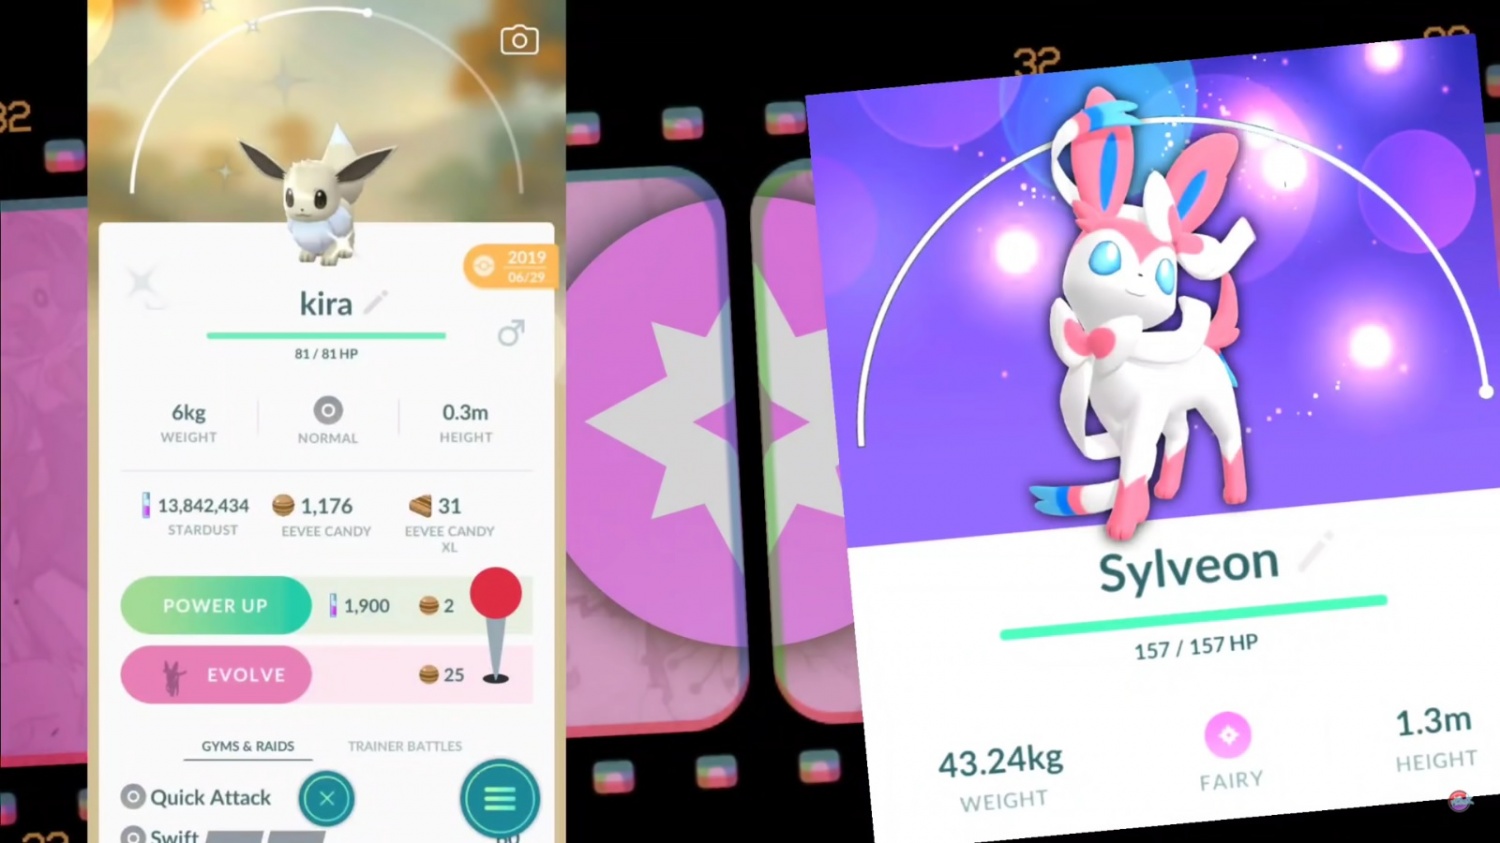 'Pokemon Go' Sylveon Name Trick Guide How to Evolve Eevee Using